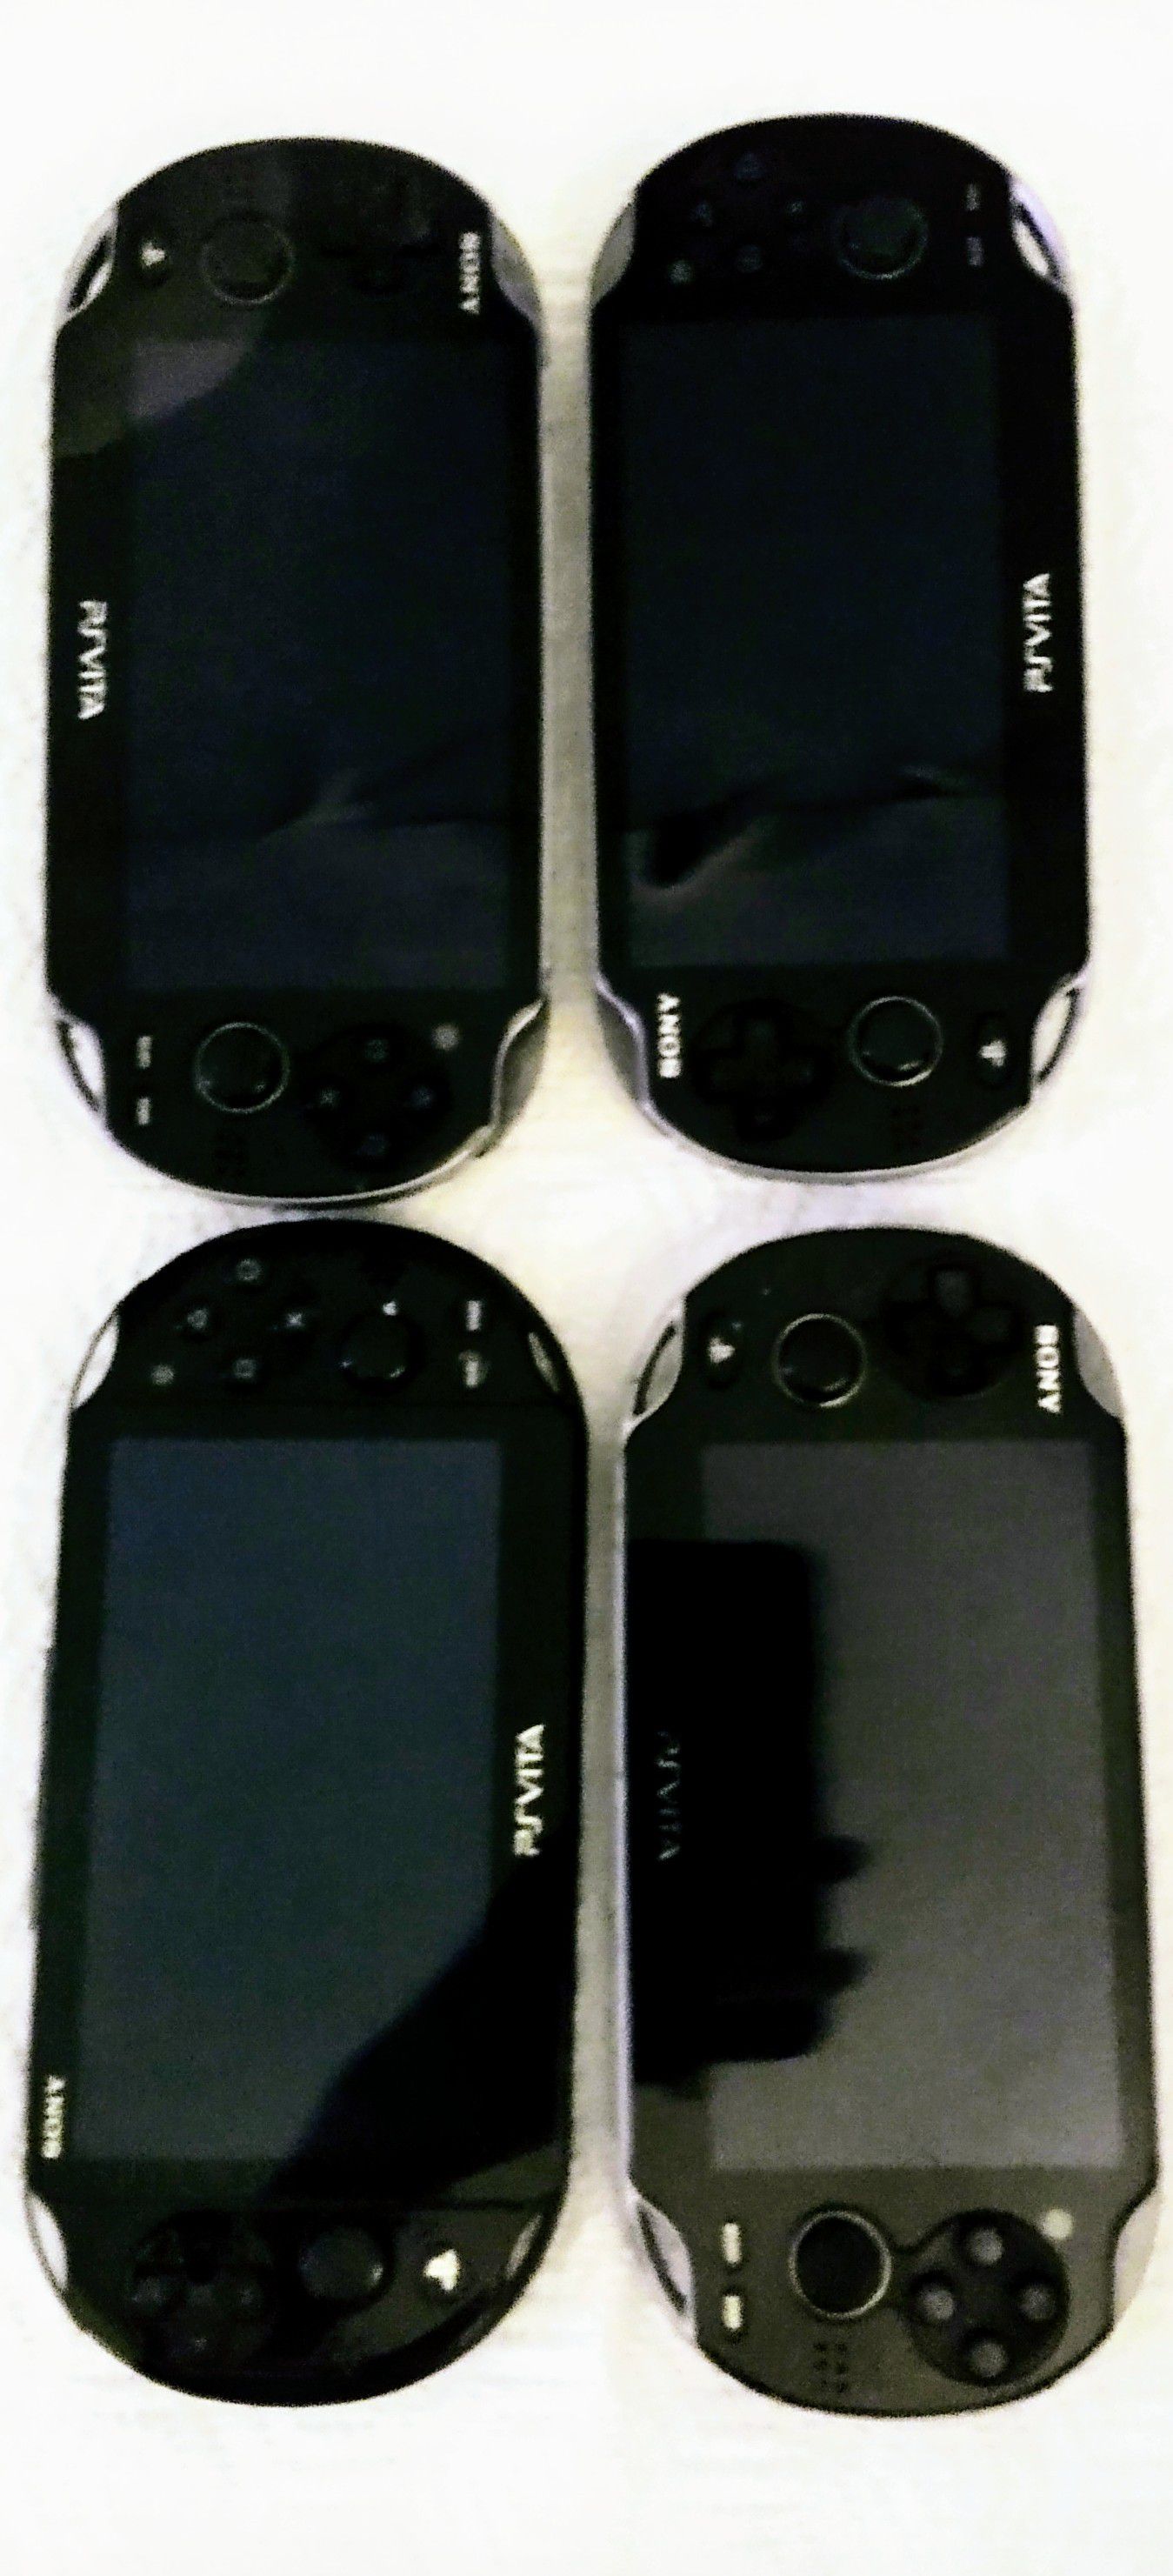 MODDED PS VITAS 64 GB WITH EVETY VITA & PSP GAMES ($180 EACH)